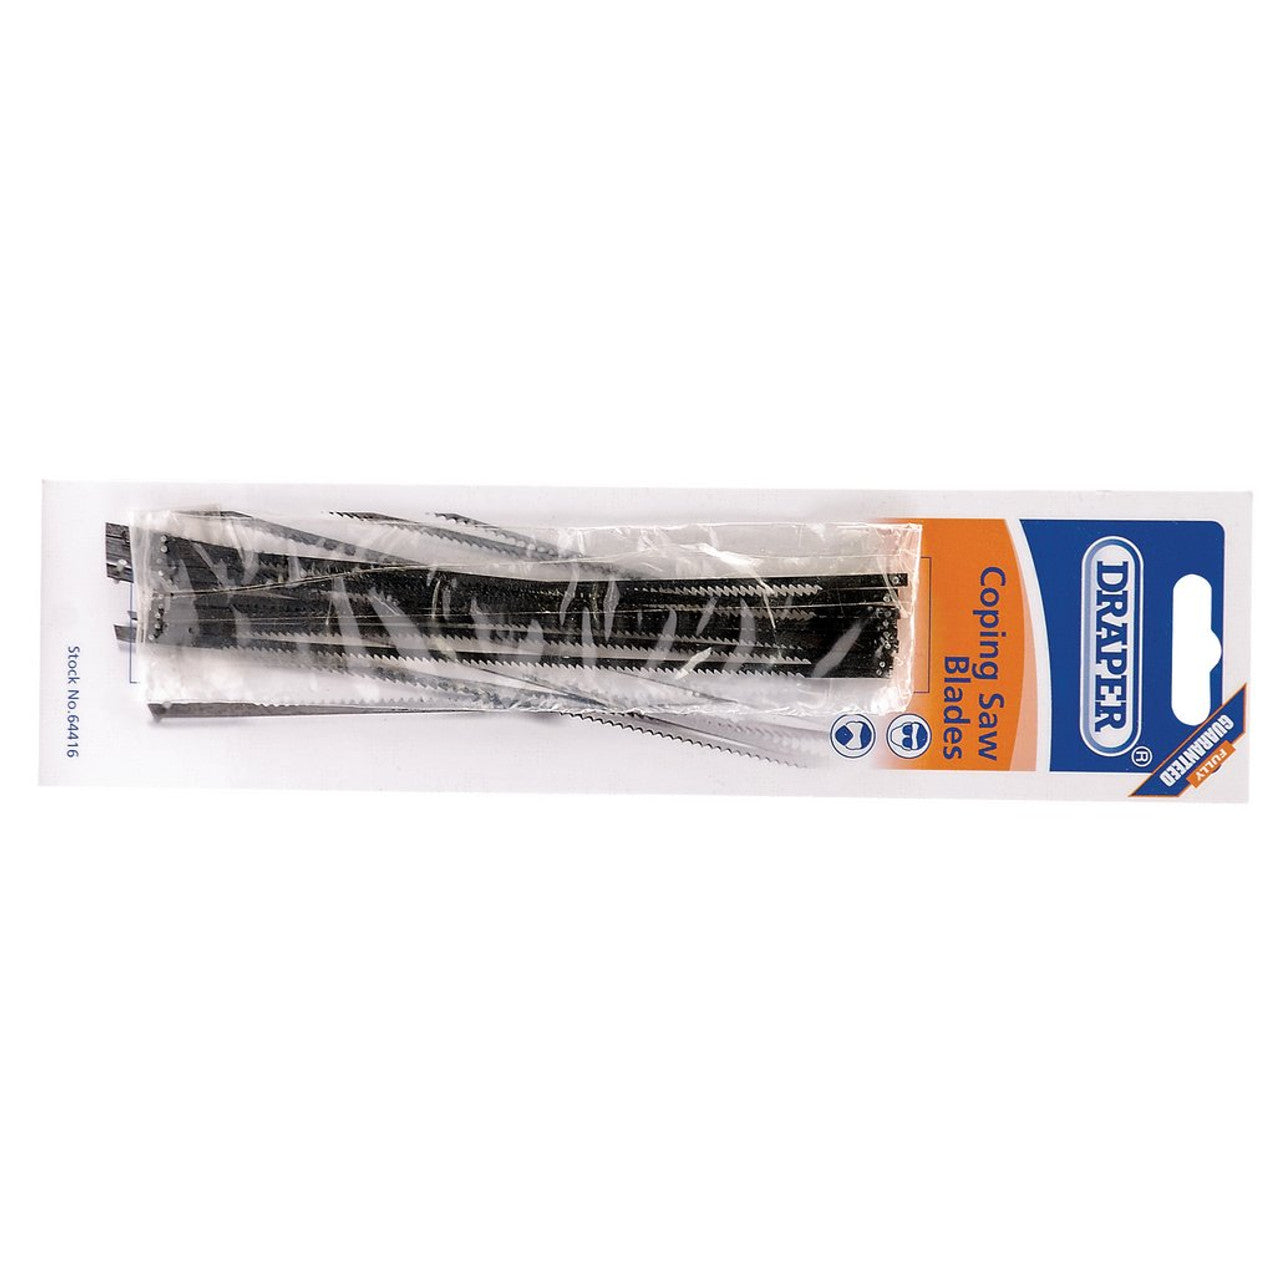 Draper 64416 Coping Saw Blades for 64408 & 18052 Saws, 15tpi (Pack of 10)